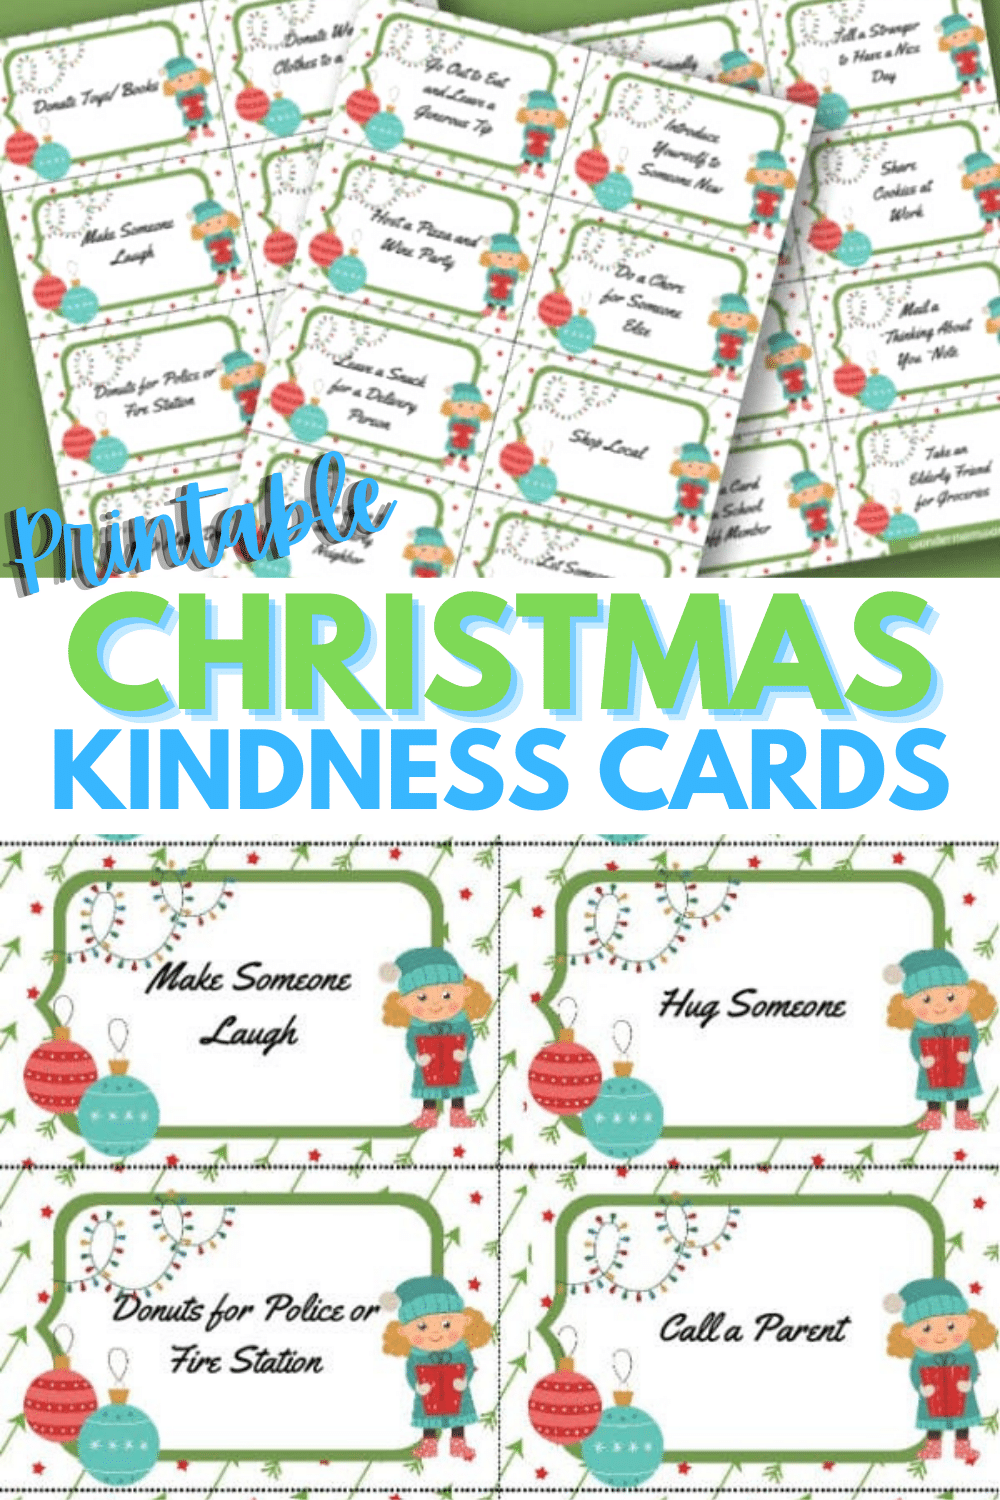 This set of printable Christmas kindness cards has four pages of acts of kindness that are perfect for your family to do this holiday season. #printables #randomactsofkindness #Christmas via @wondermomwannab